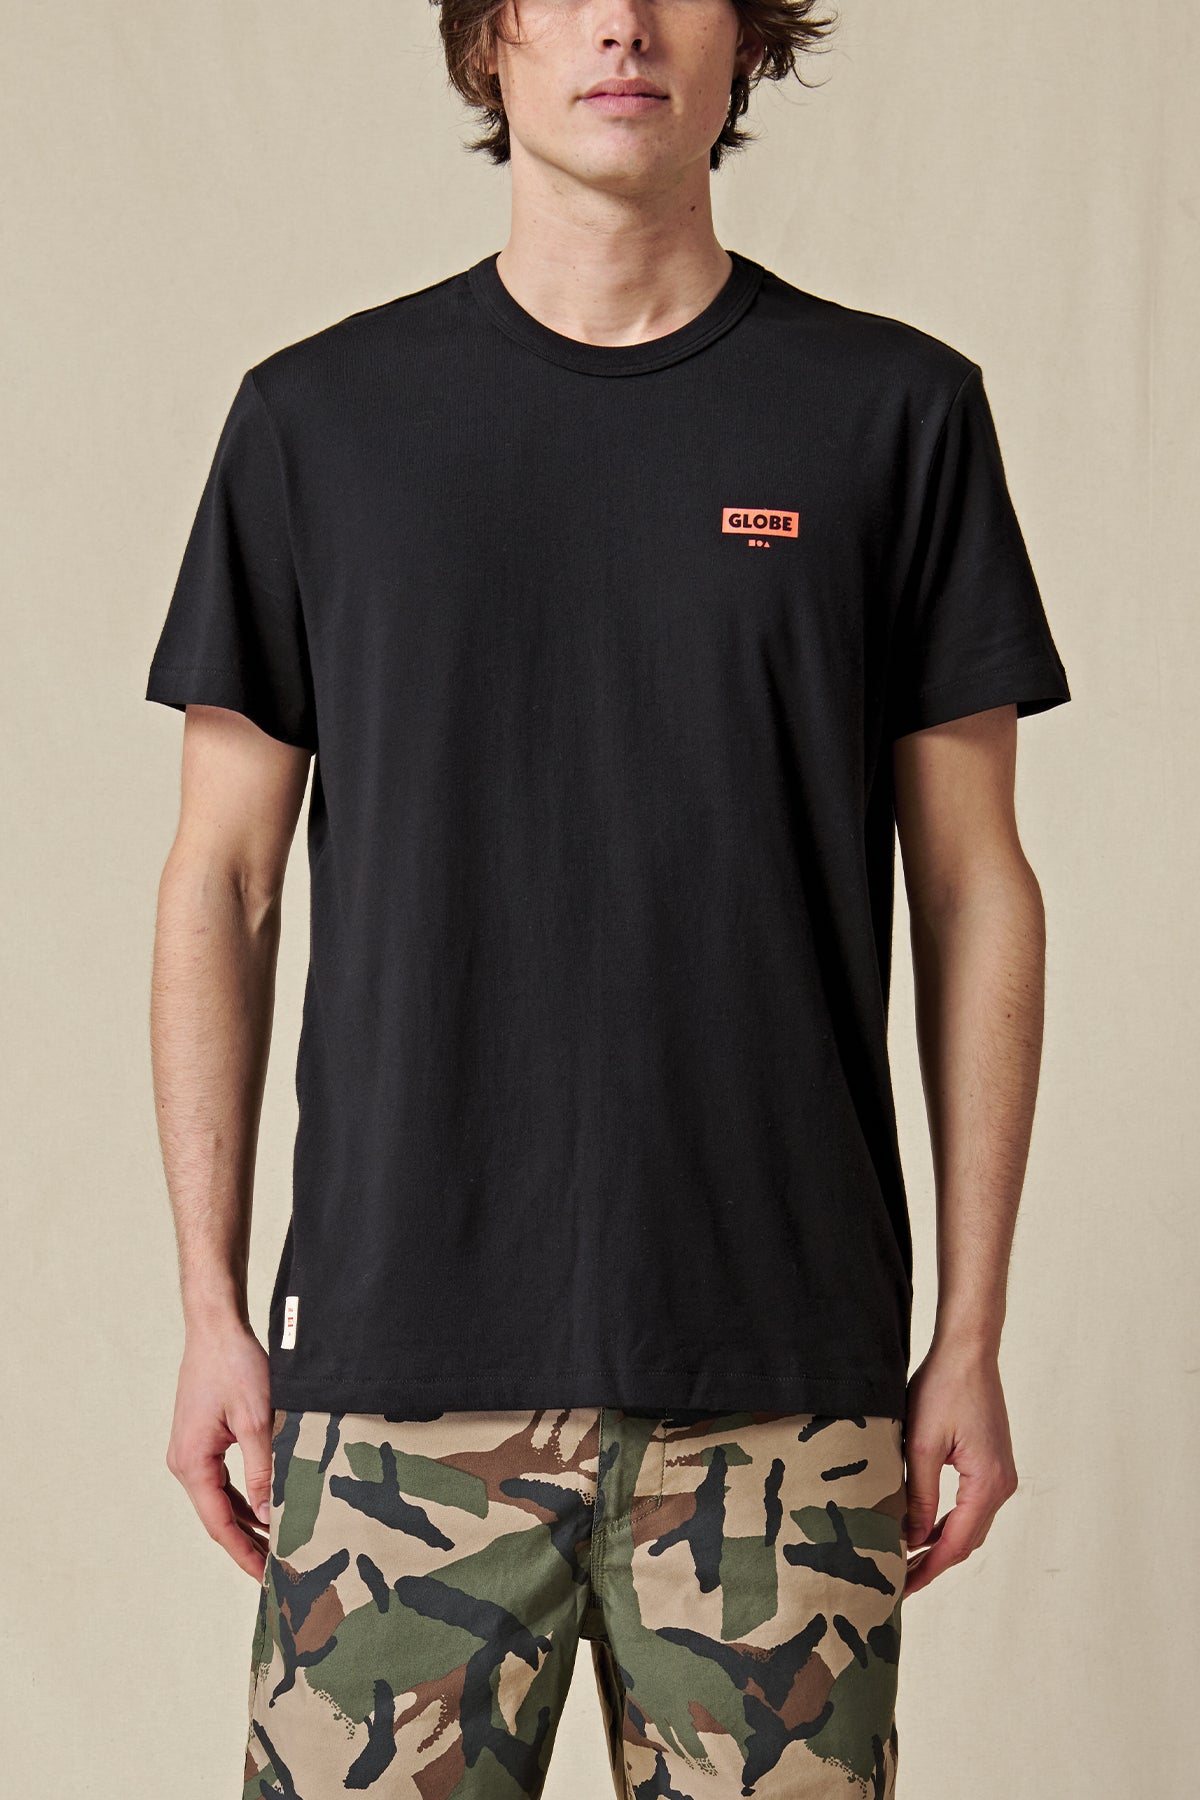 front view of Black Globe tee